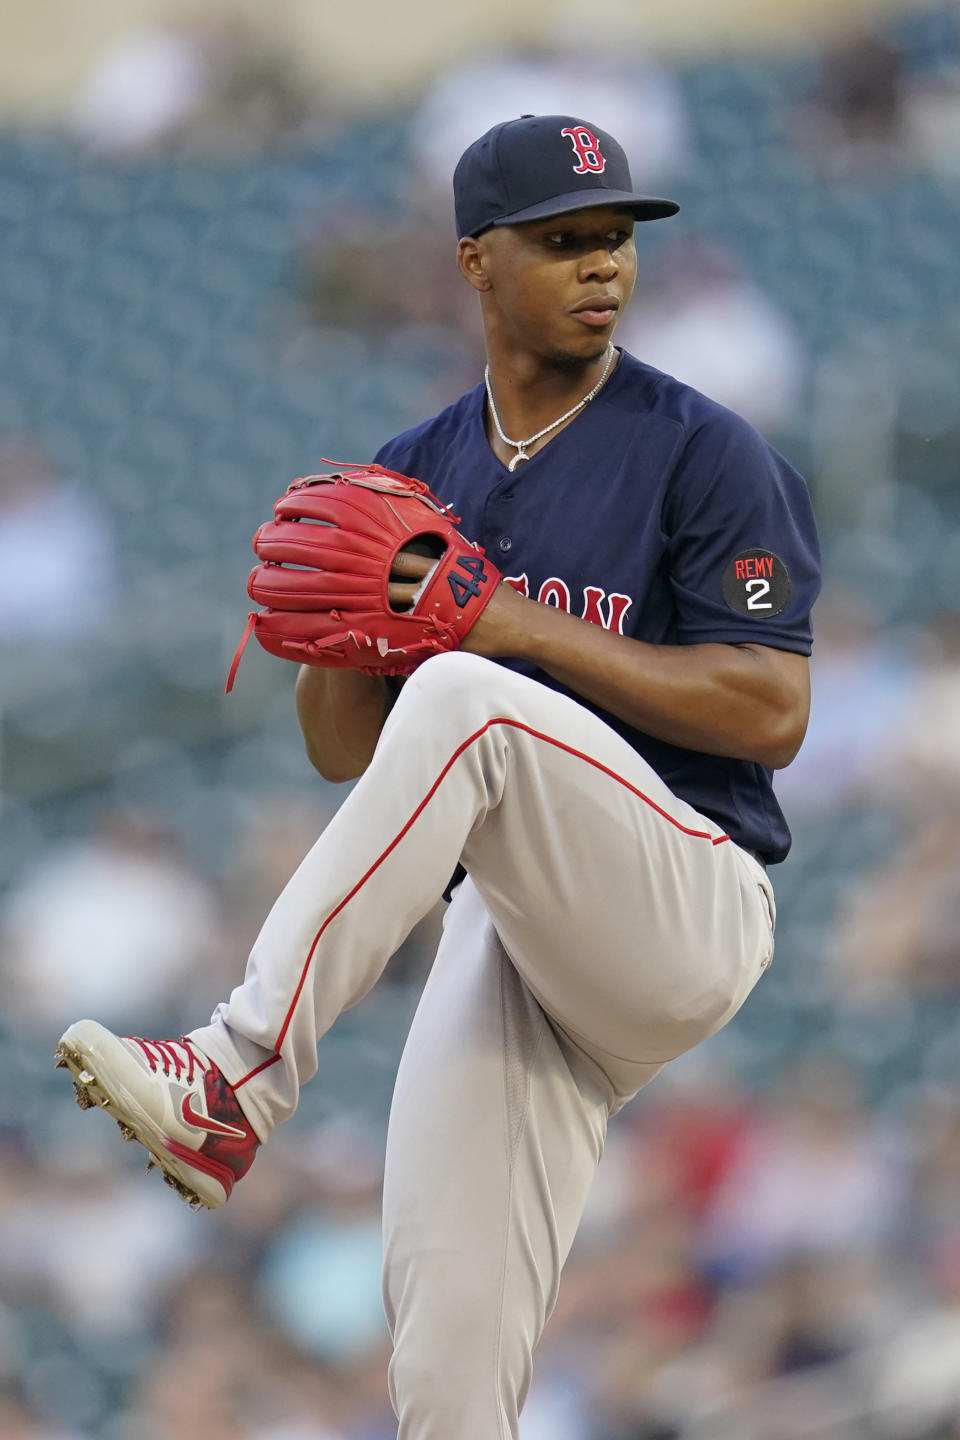 Boston Red Sox starting pitcher Brayan Bello delivers during the second inning of a baseball game against the Minnesota Twins, Monday, Aug. 29, 2022, in Minneapolis. (AP Photo/Abbie Parr)